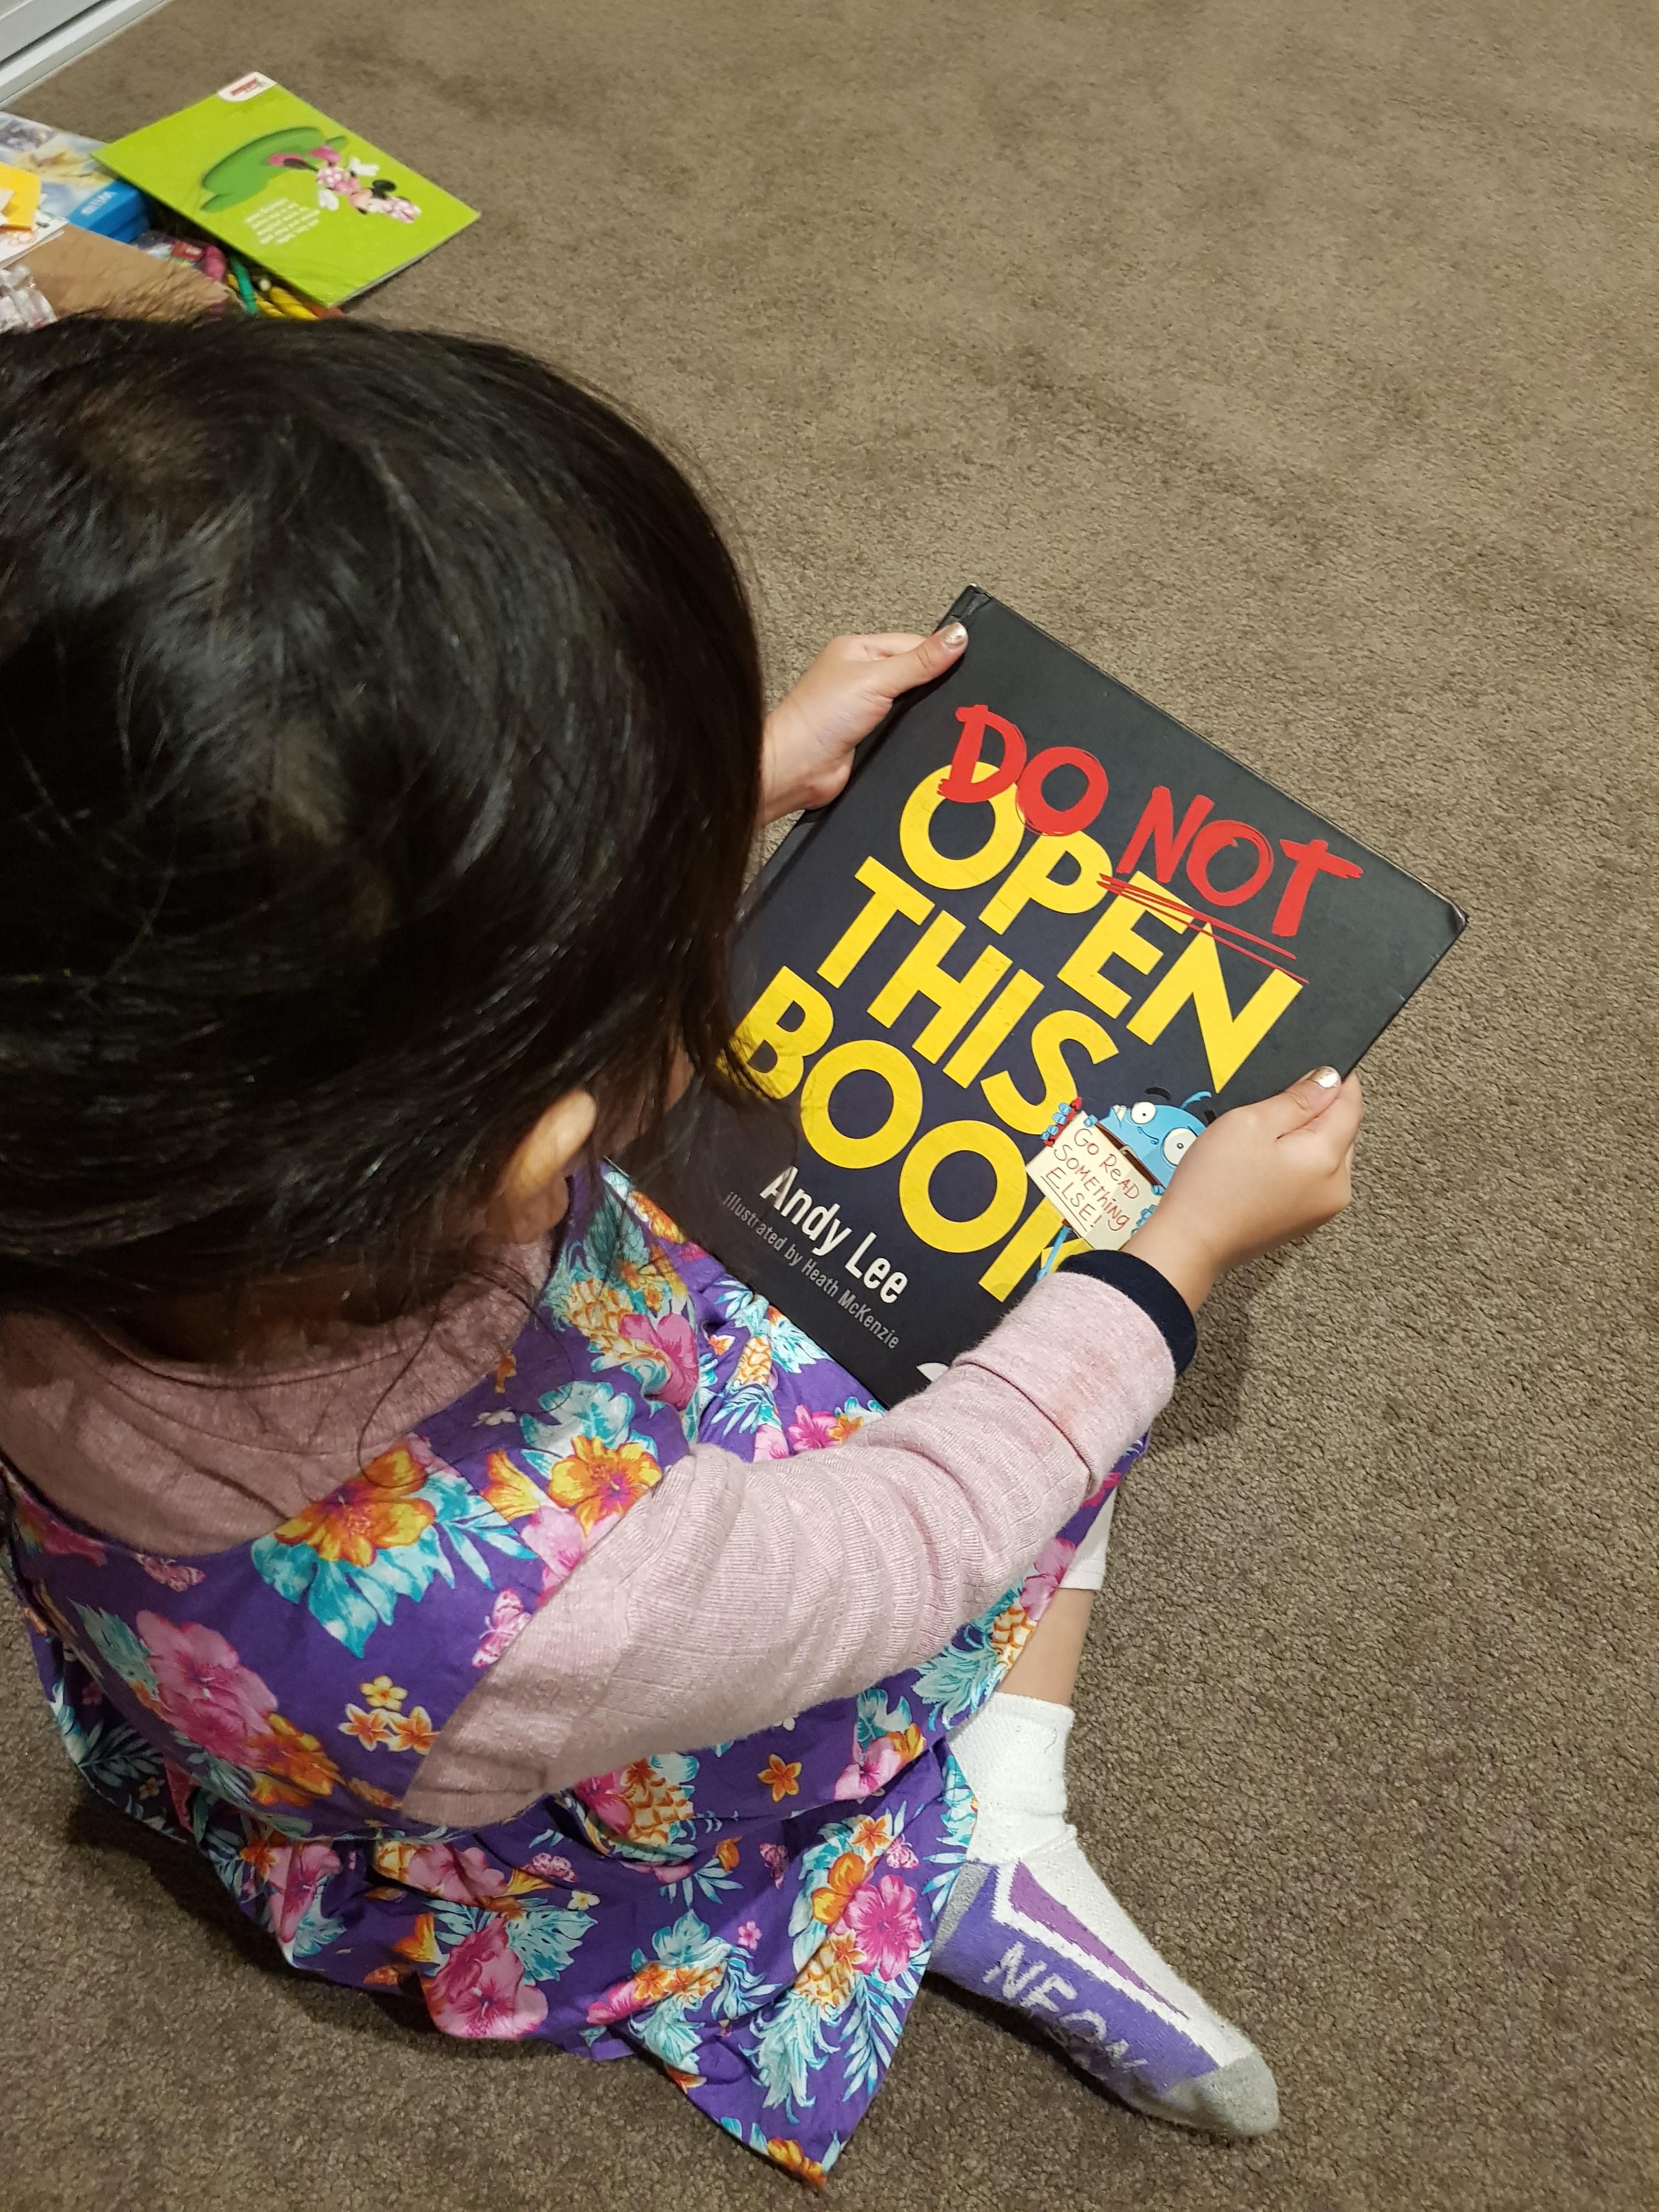 My daughter is unsure on how to proceed with her reading assignment